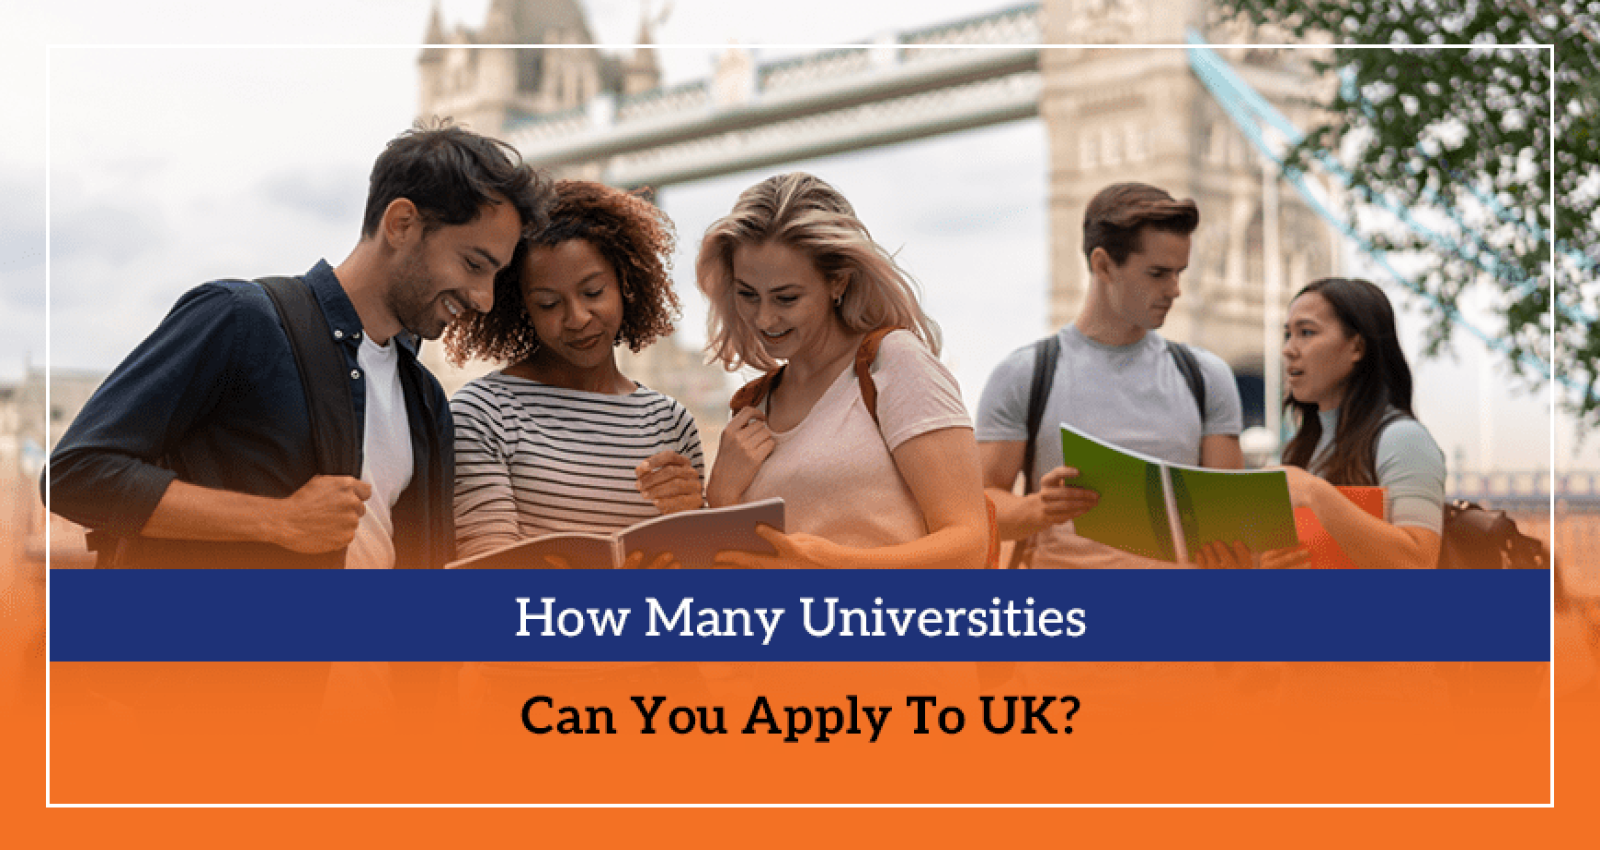 How Many Universities Can You Apply To UK